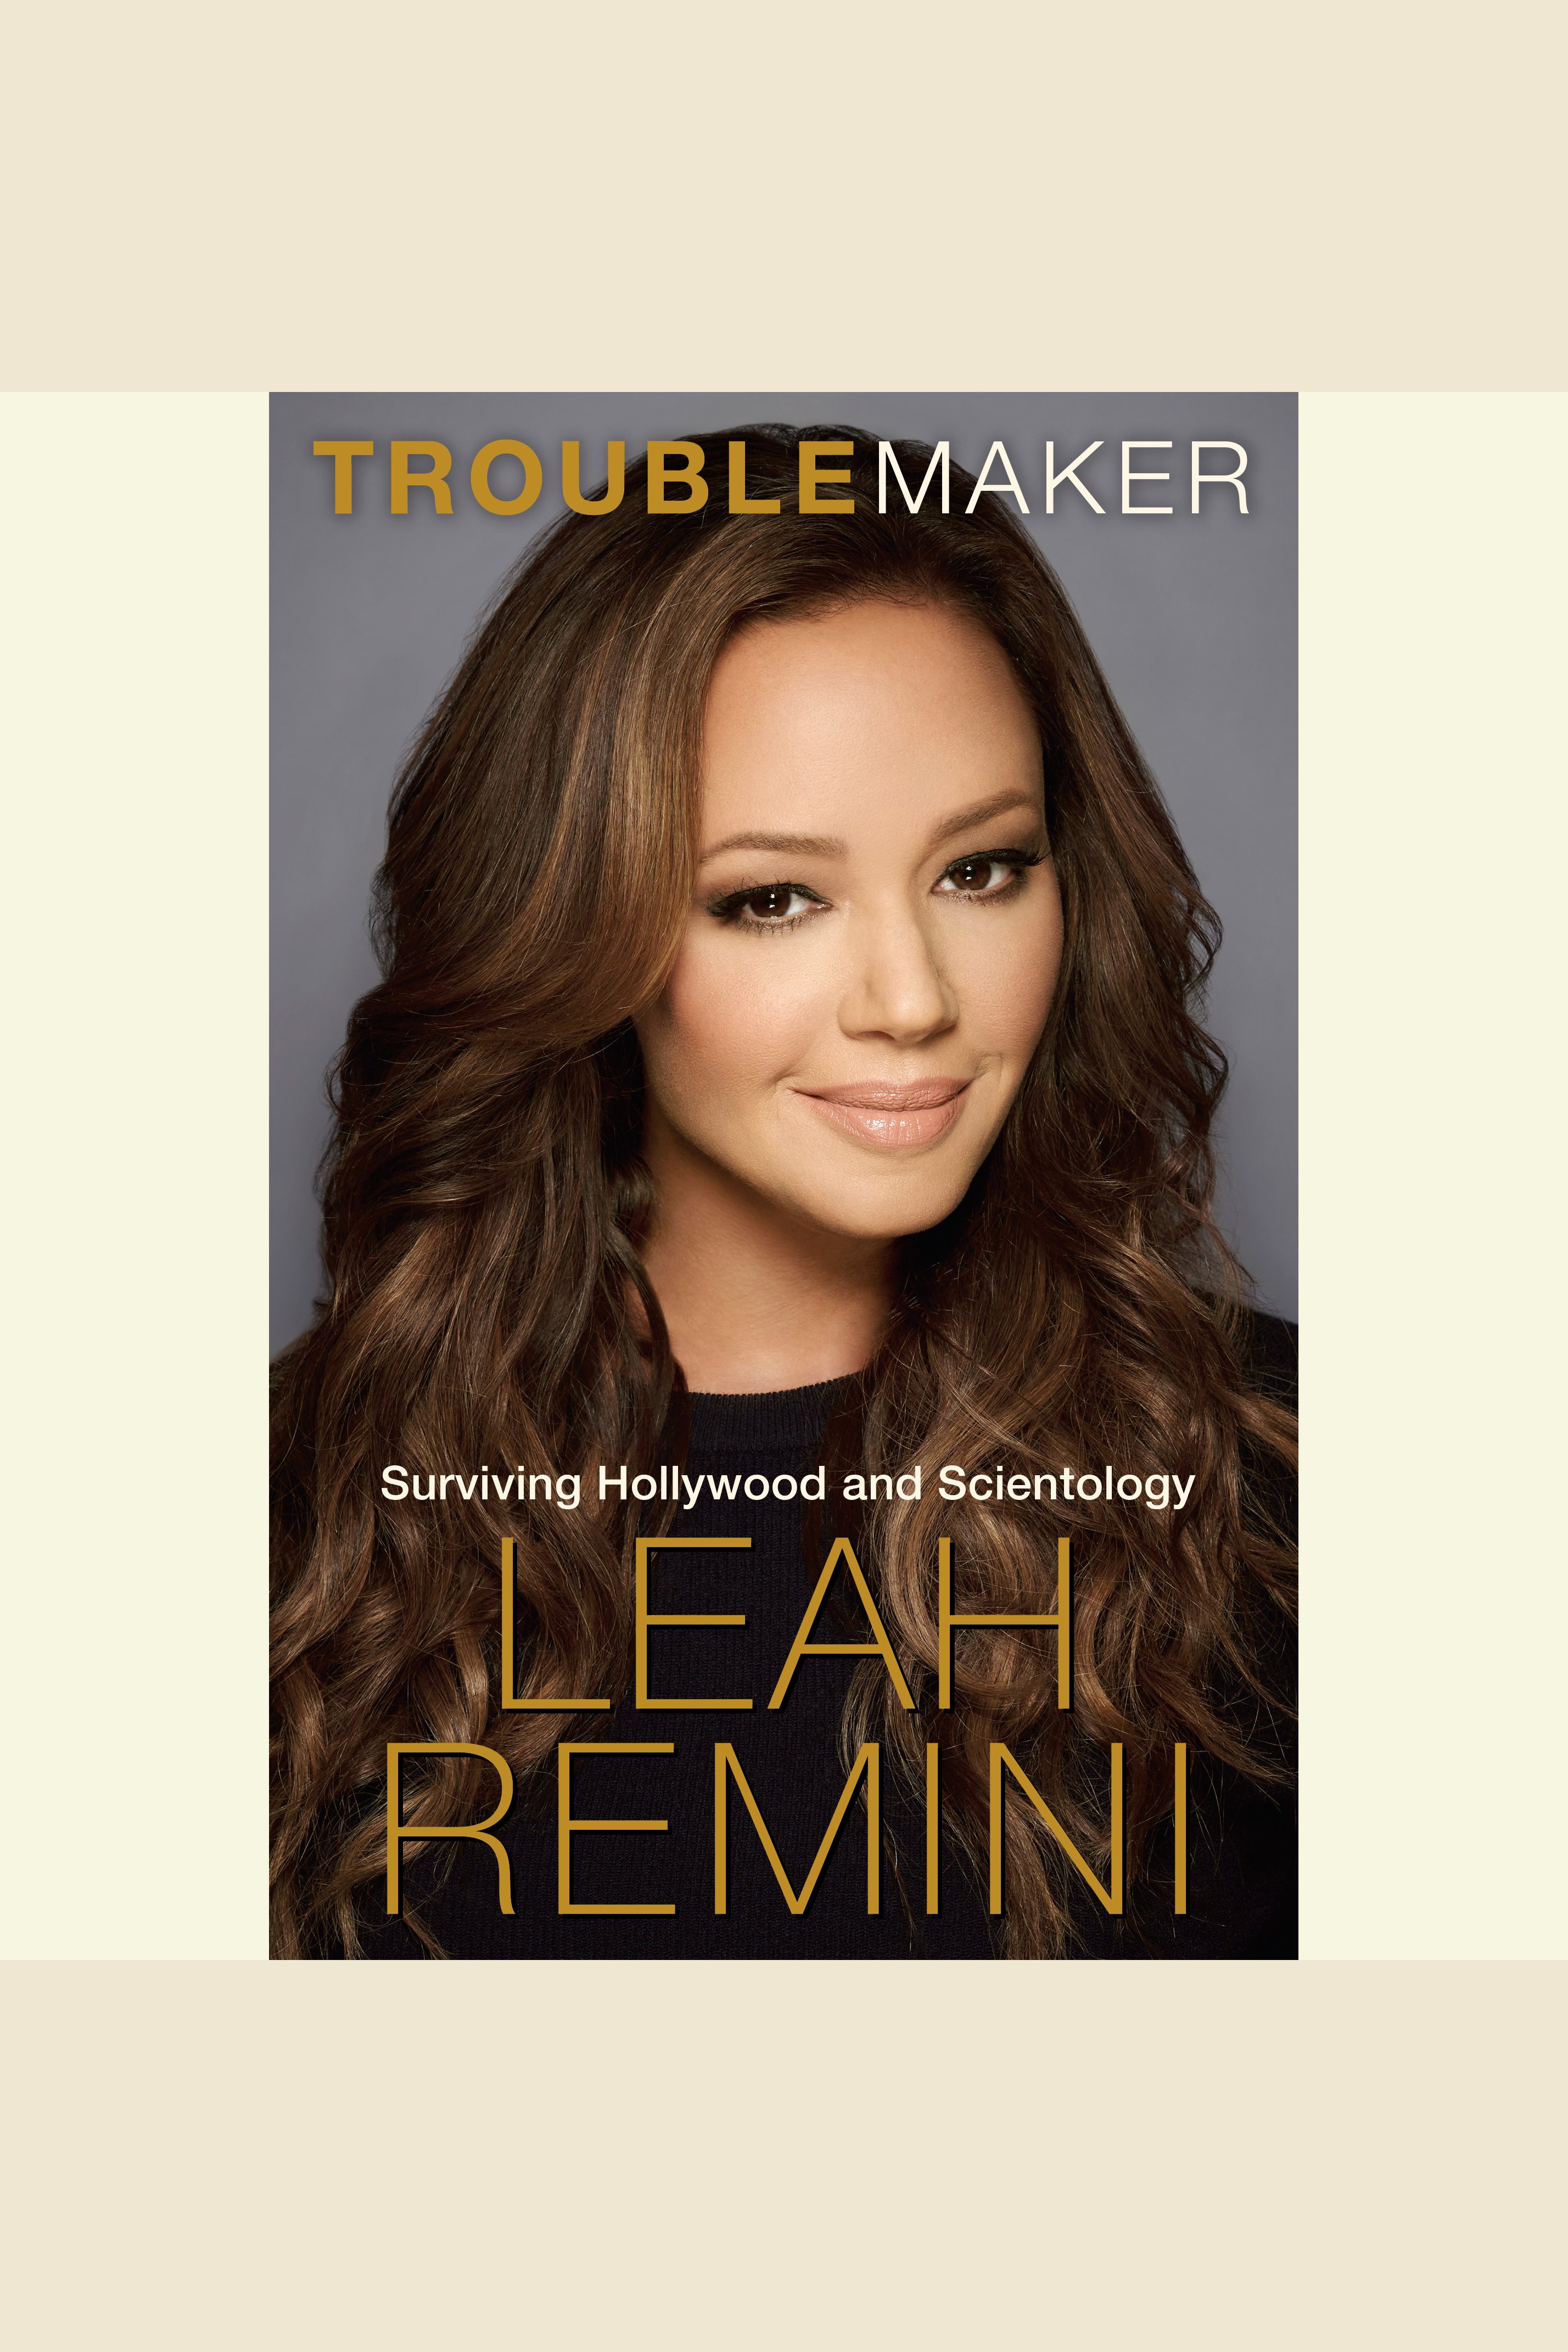 Troublemaker surviving Hollywood and Scientology cover image